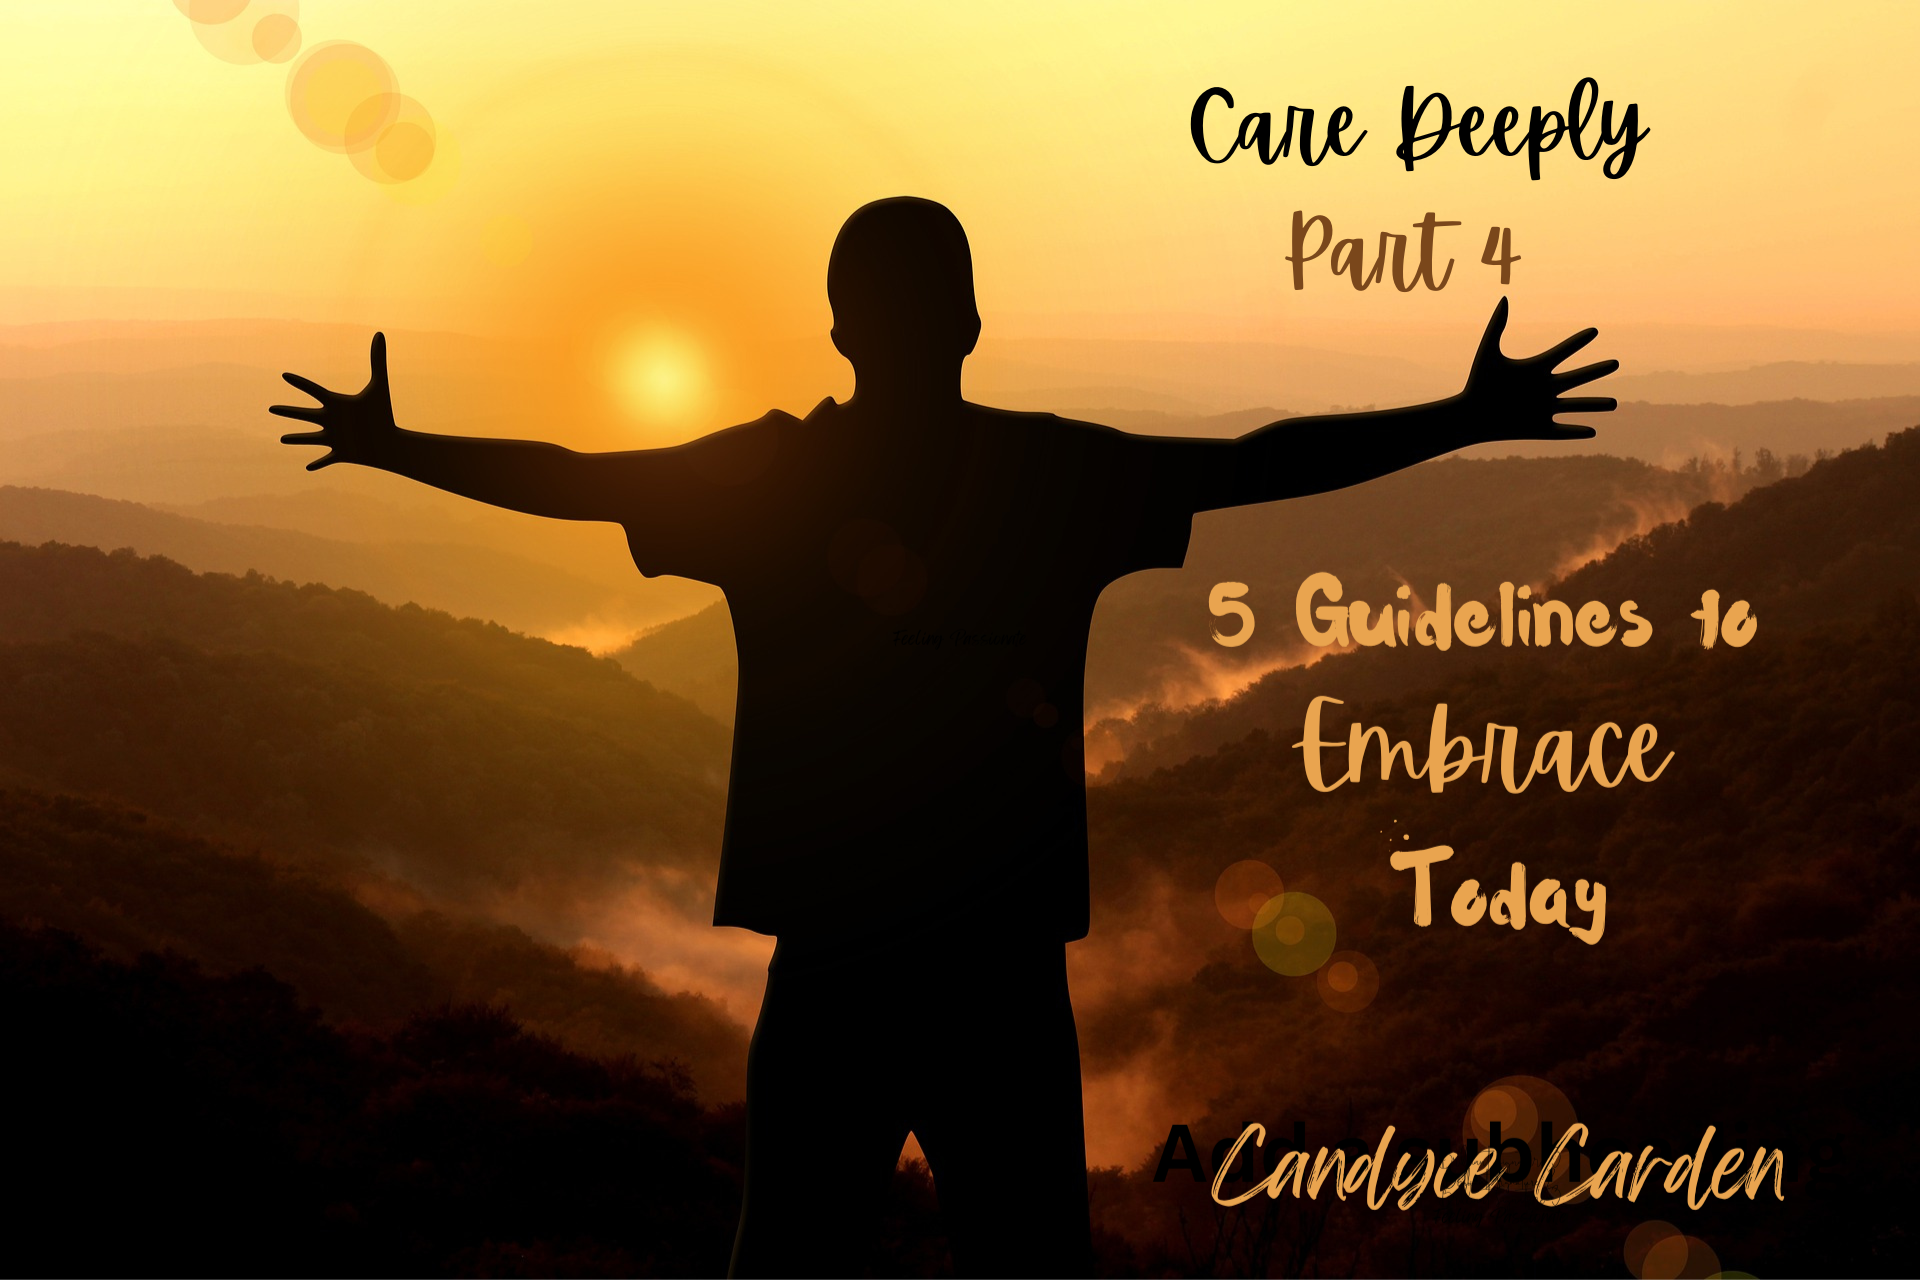 5 Guidelines to Embrace for Doing Life Today ~ Care Deeply